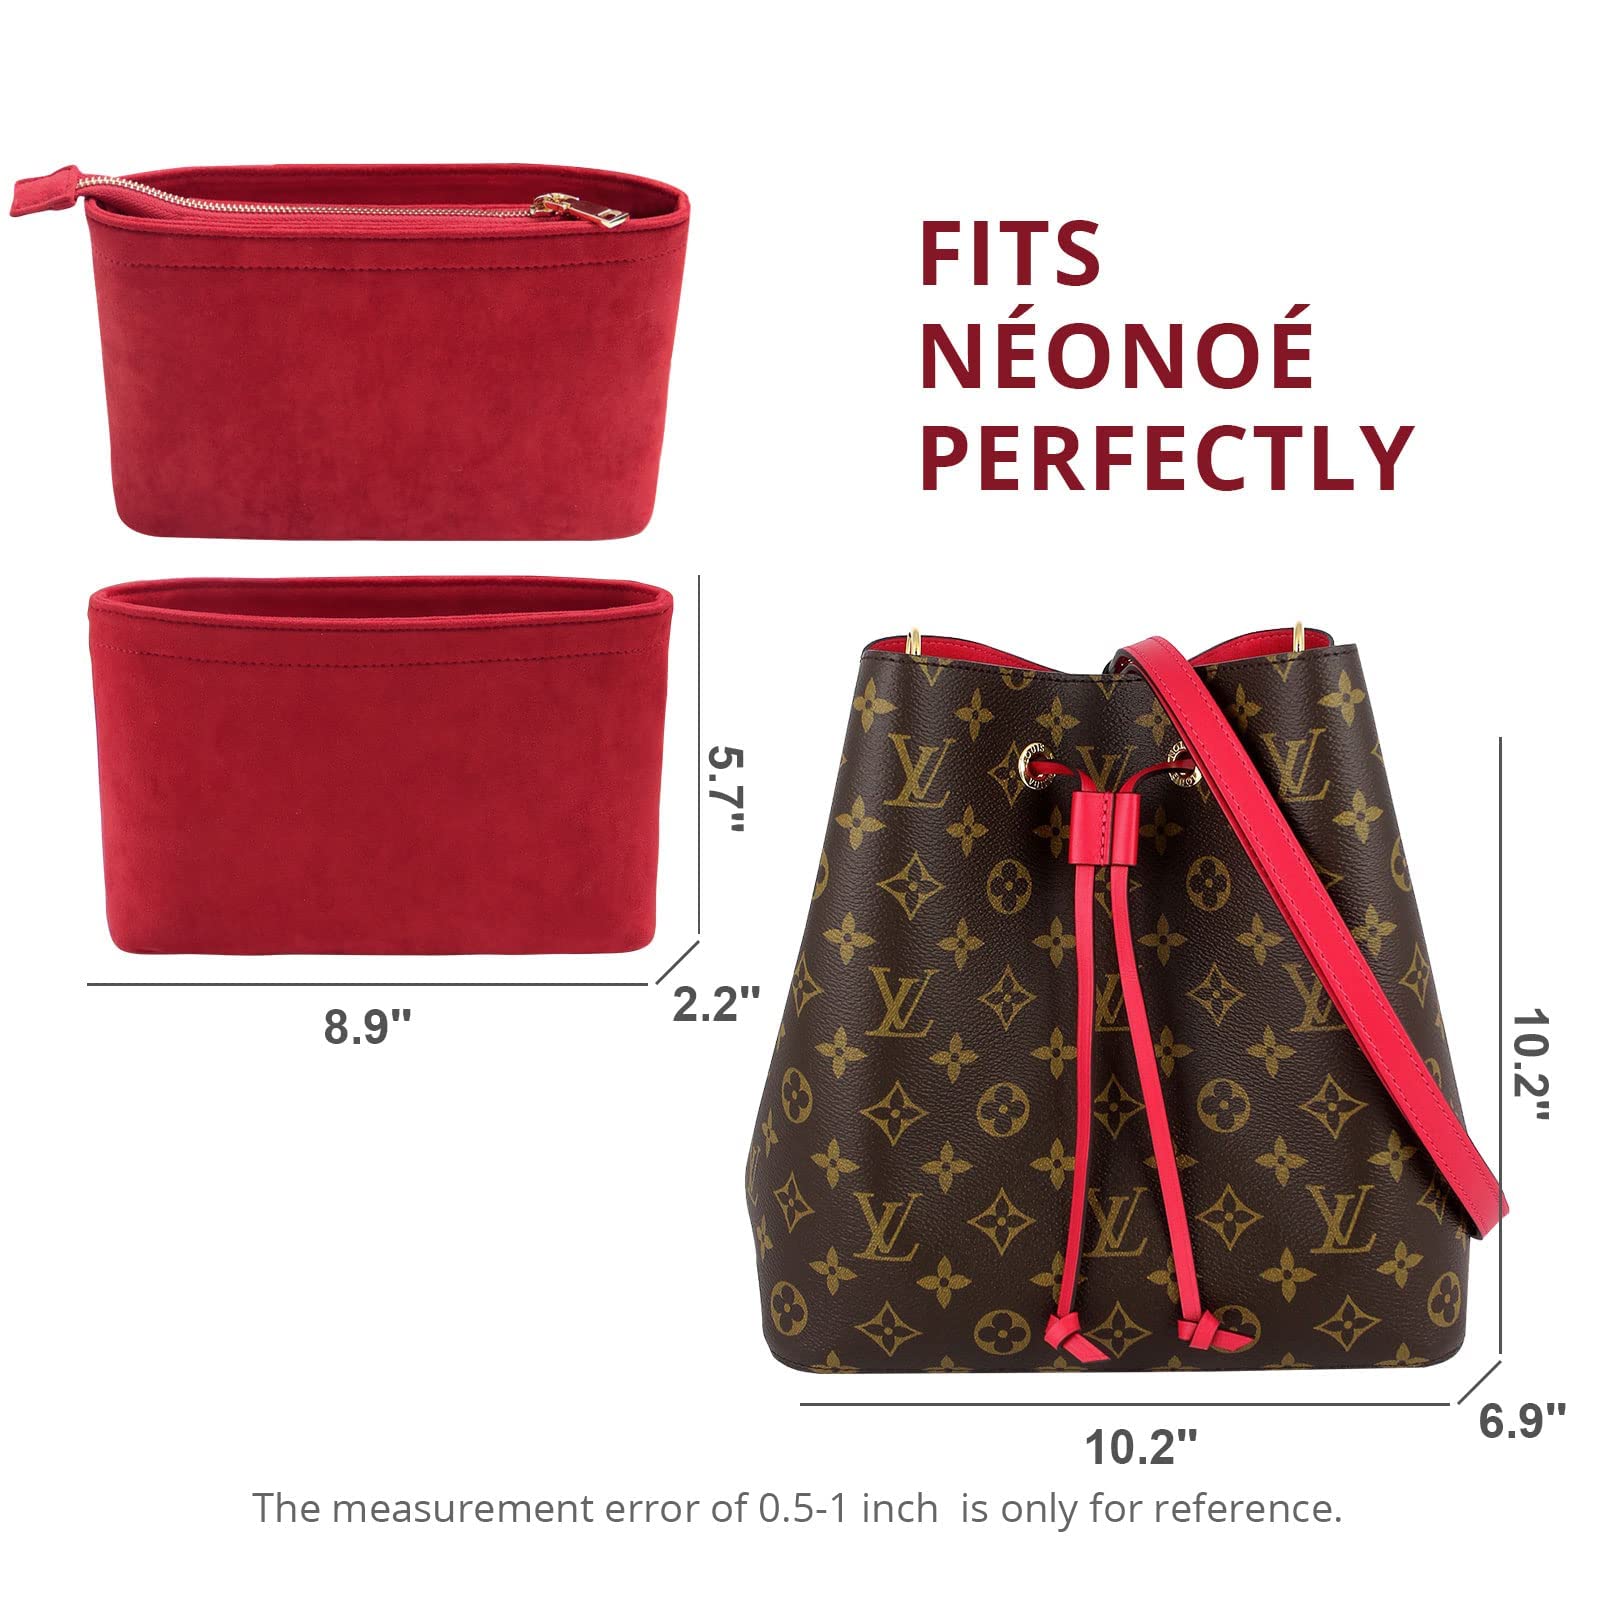 What Fits Inside The Louis Vuitton Neo Noe Should You Get It? Full